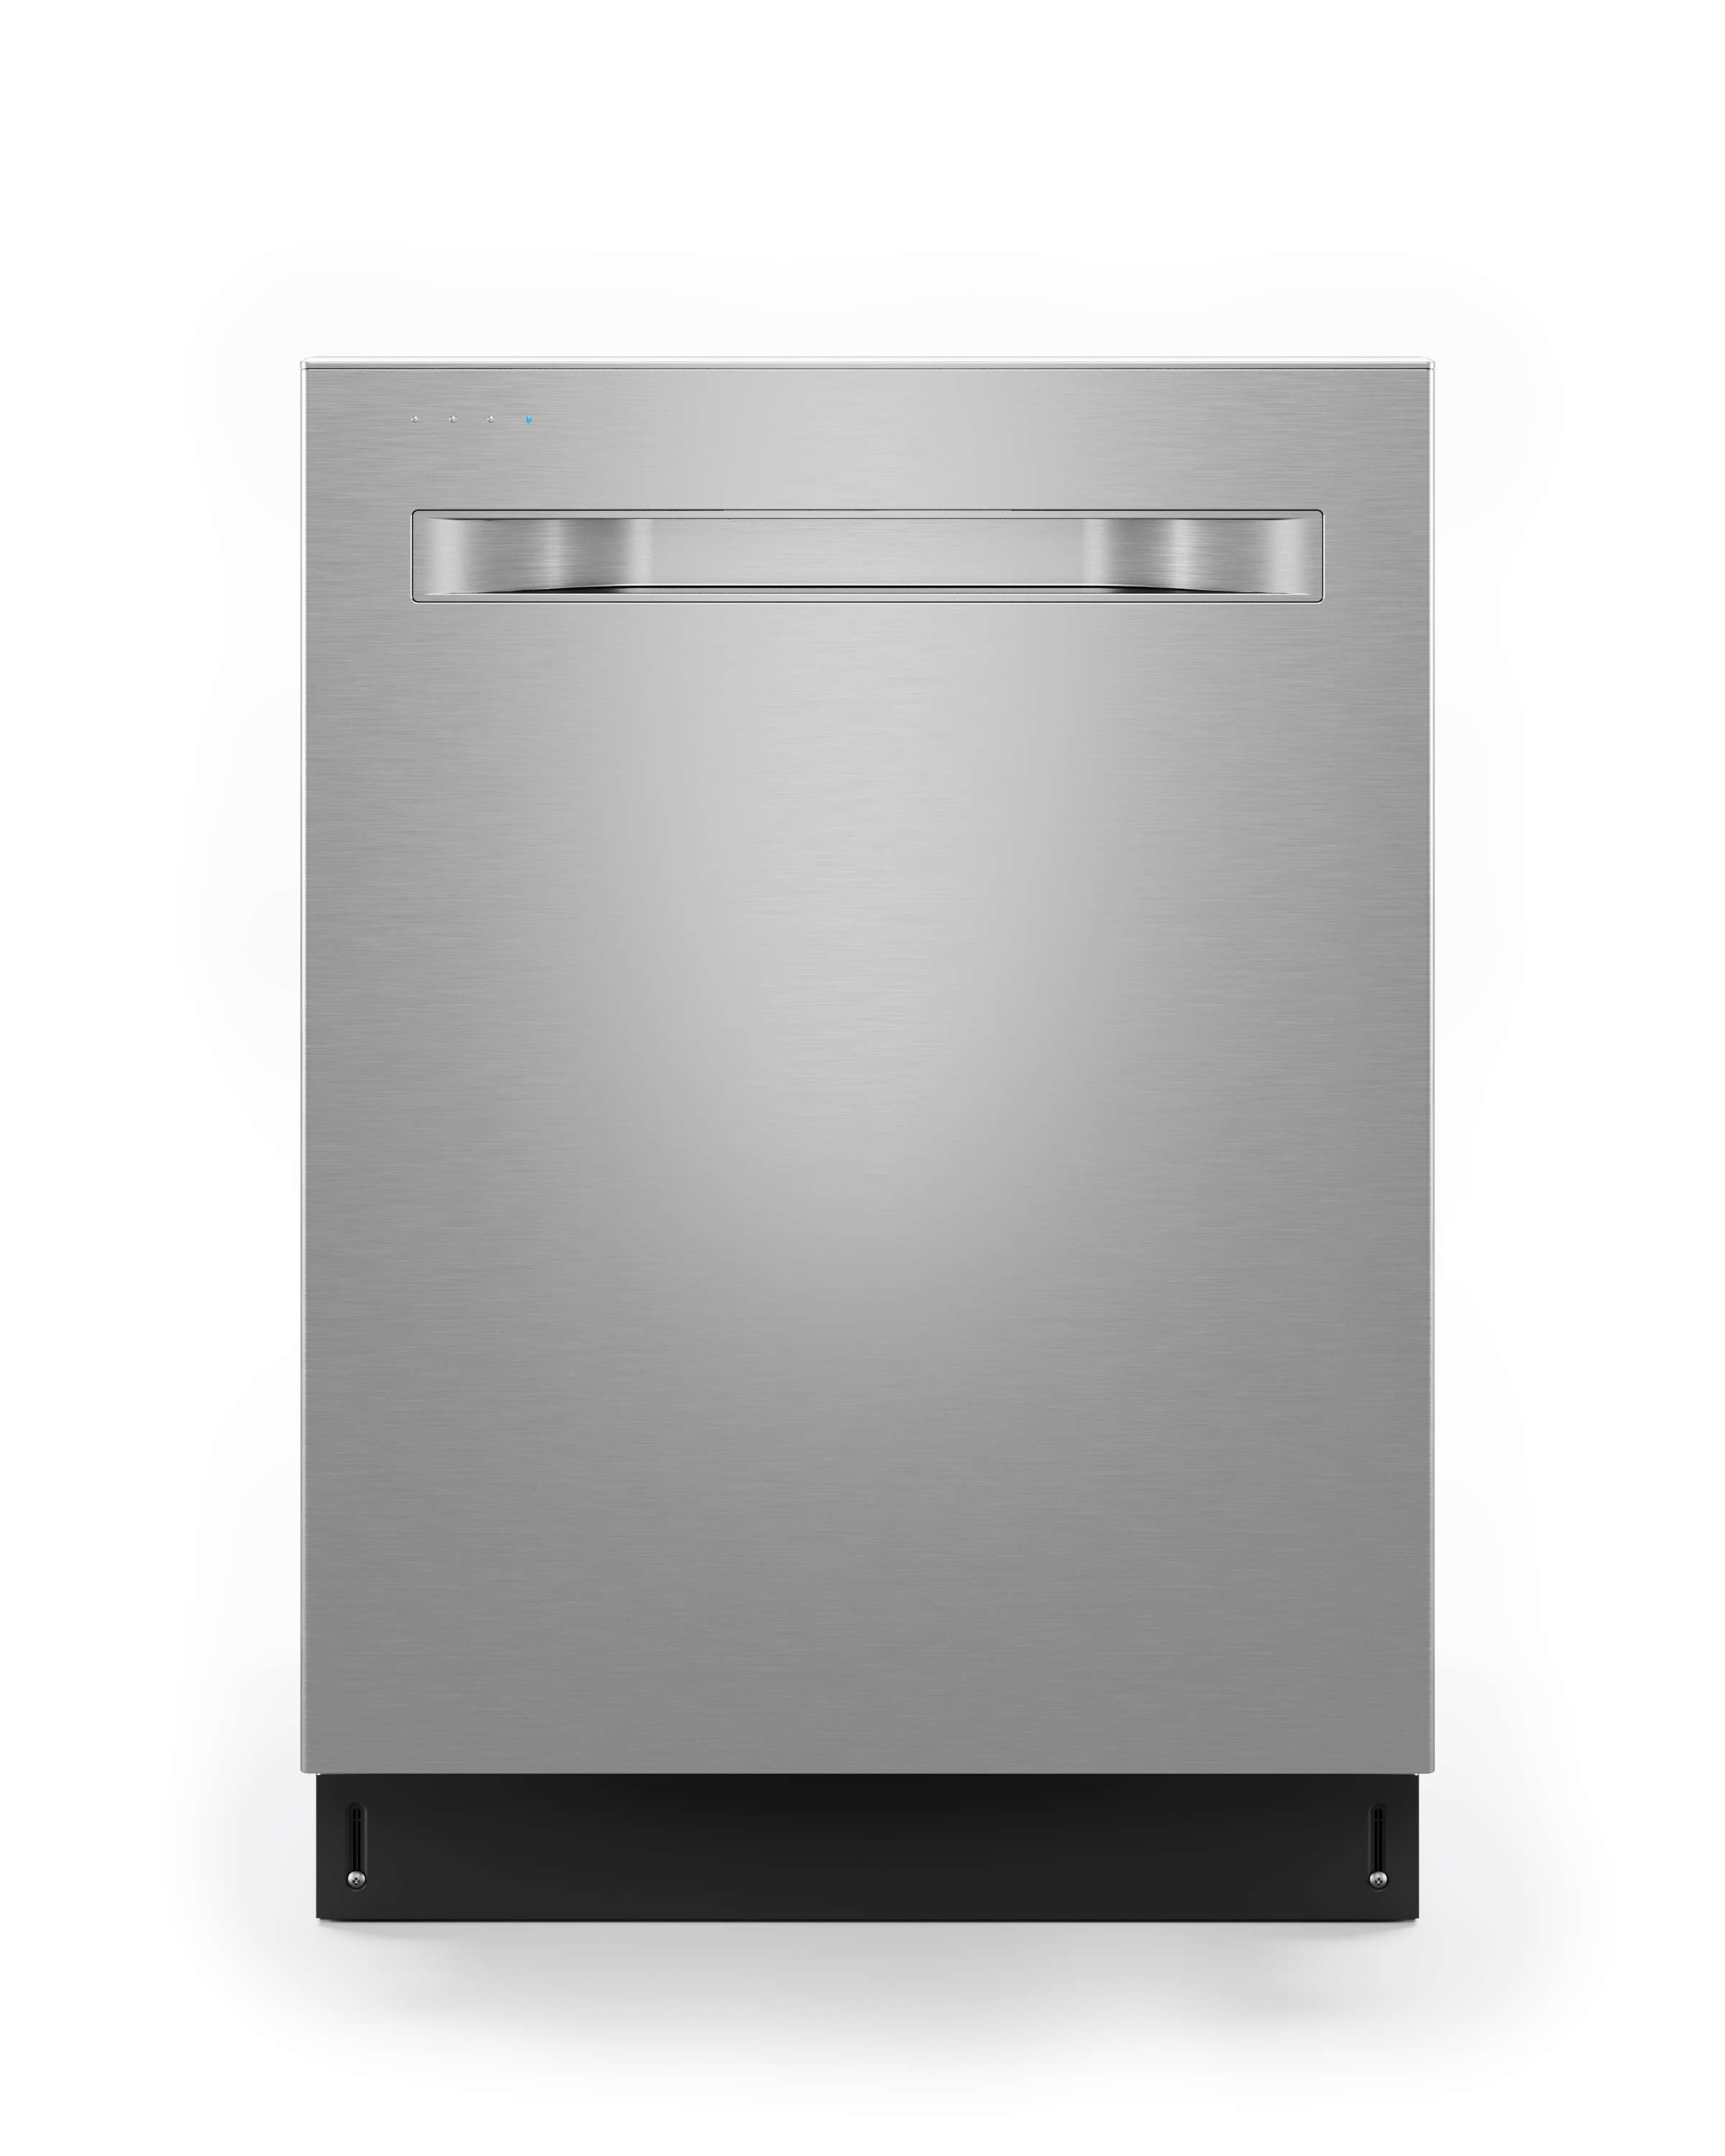 Dishwashers - Stainless Steel 24" Dishwasher with Pocket Handle, Wi-Fi, and 45 dBA